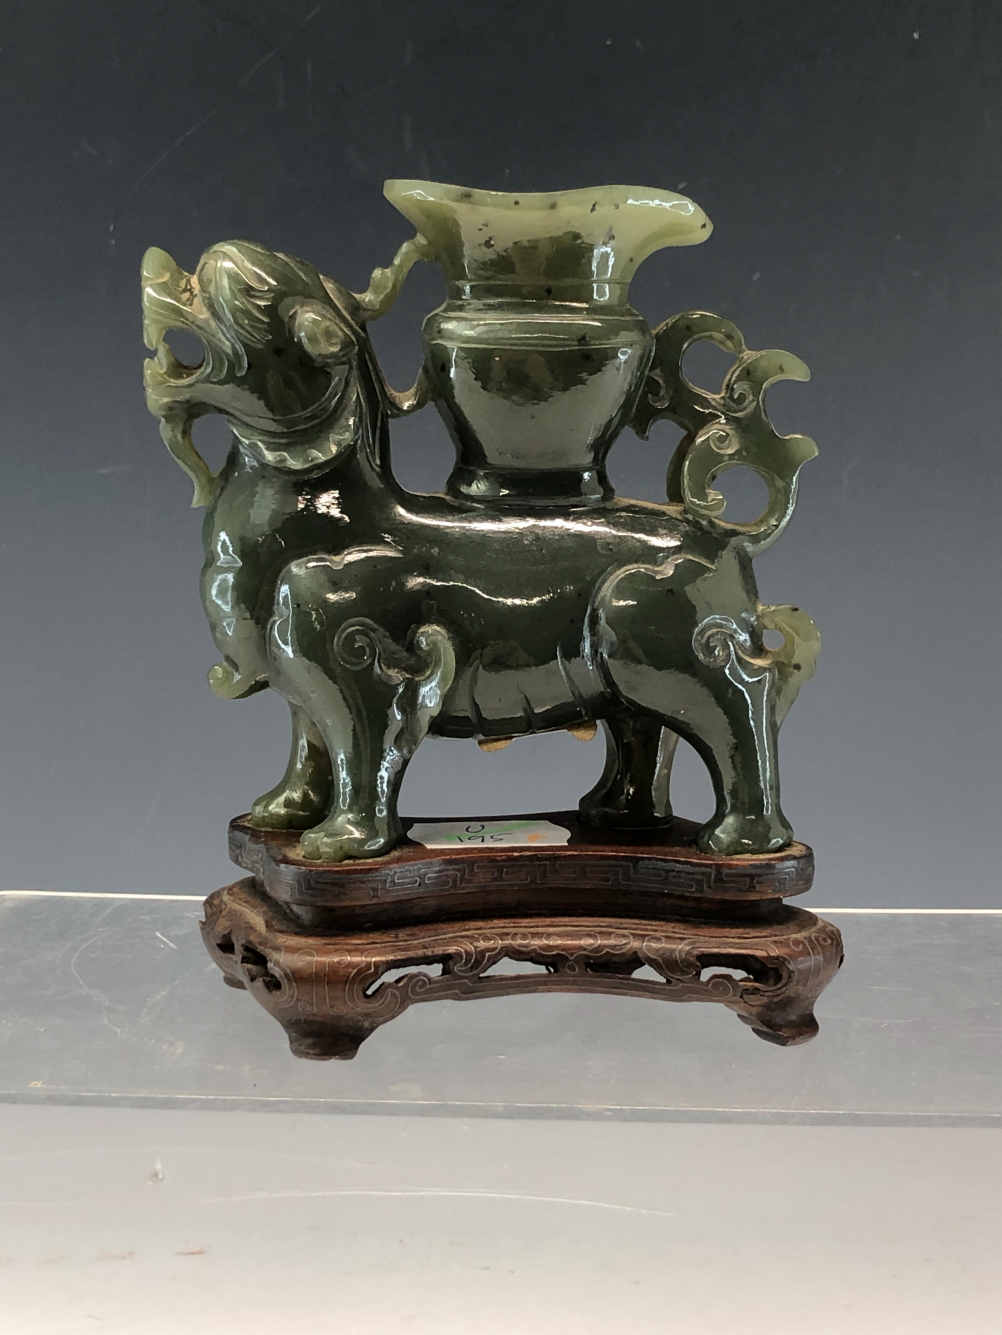 A CHINESE GREEN HARDSTONE FIGURE OF A QILIN WITH A VASE ON ITS BACK. W 11cms. TOGETHER WITH ITS